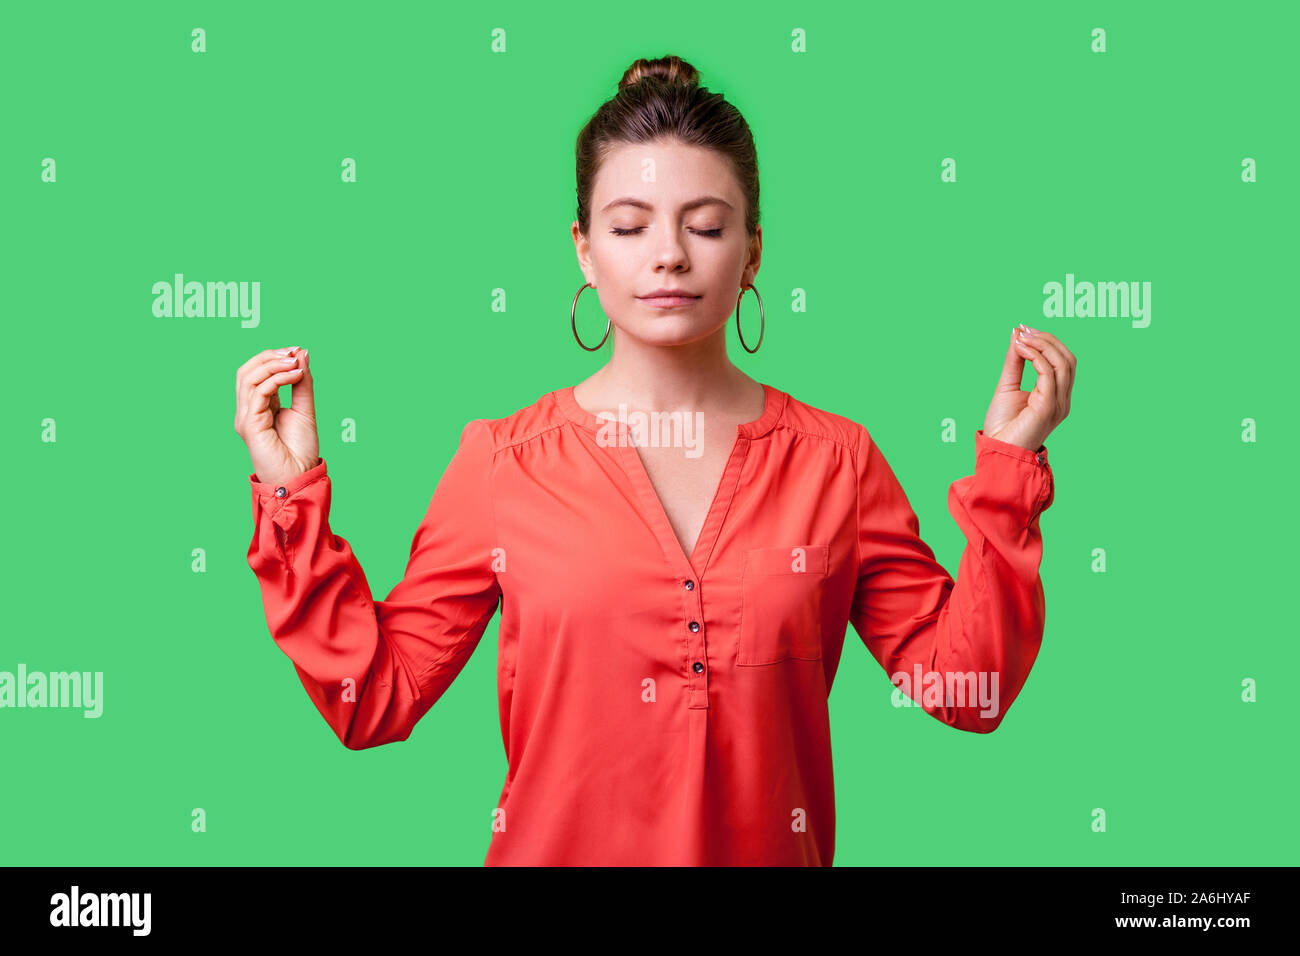 Portrait of peaceful young woman with bun hairstyle, big earrings and in red blouse relaxing and doing meditation gesture with fingers, practicing yog Stock Photo